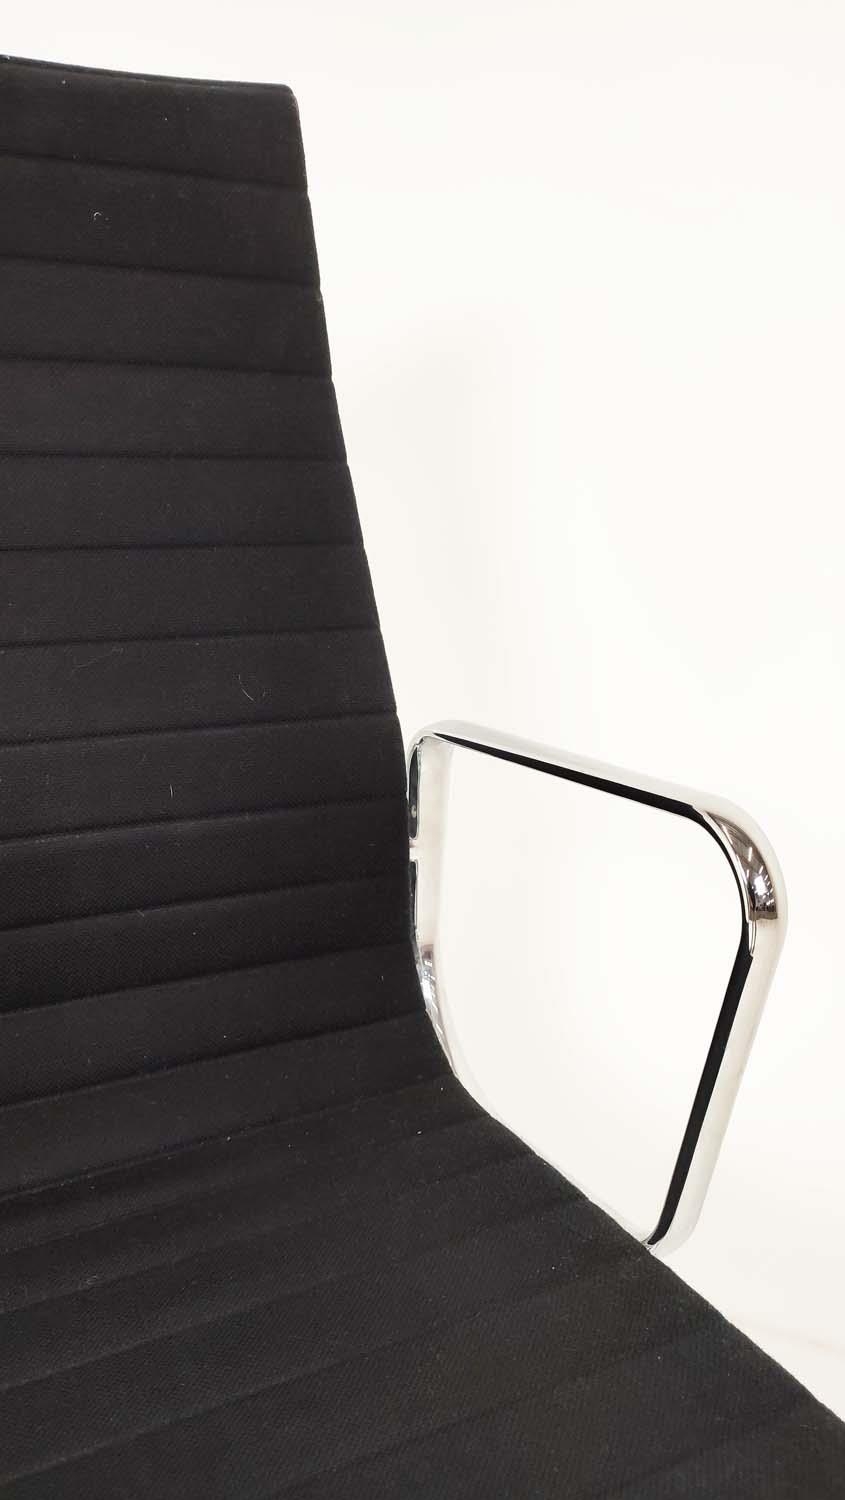 VITRA ALUMINIUM GROUP CHAIR, by Charles and Ray Eames, 113.5cm H at largest. - Image 6 of 9